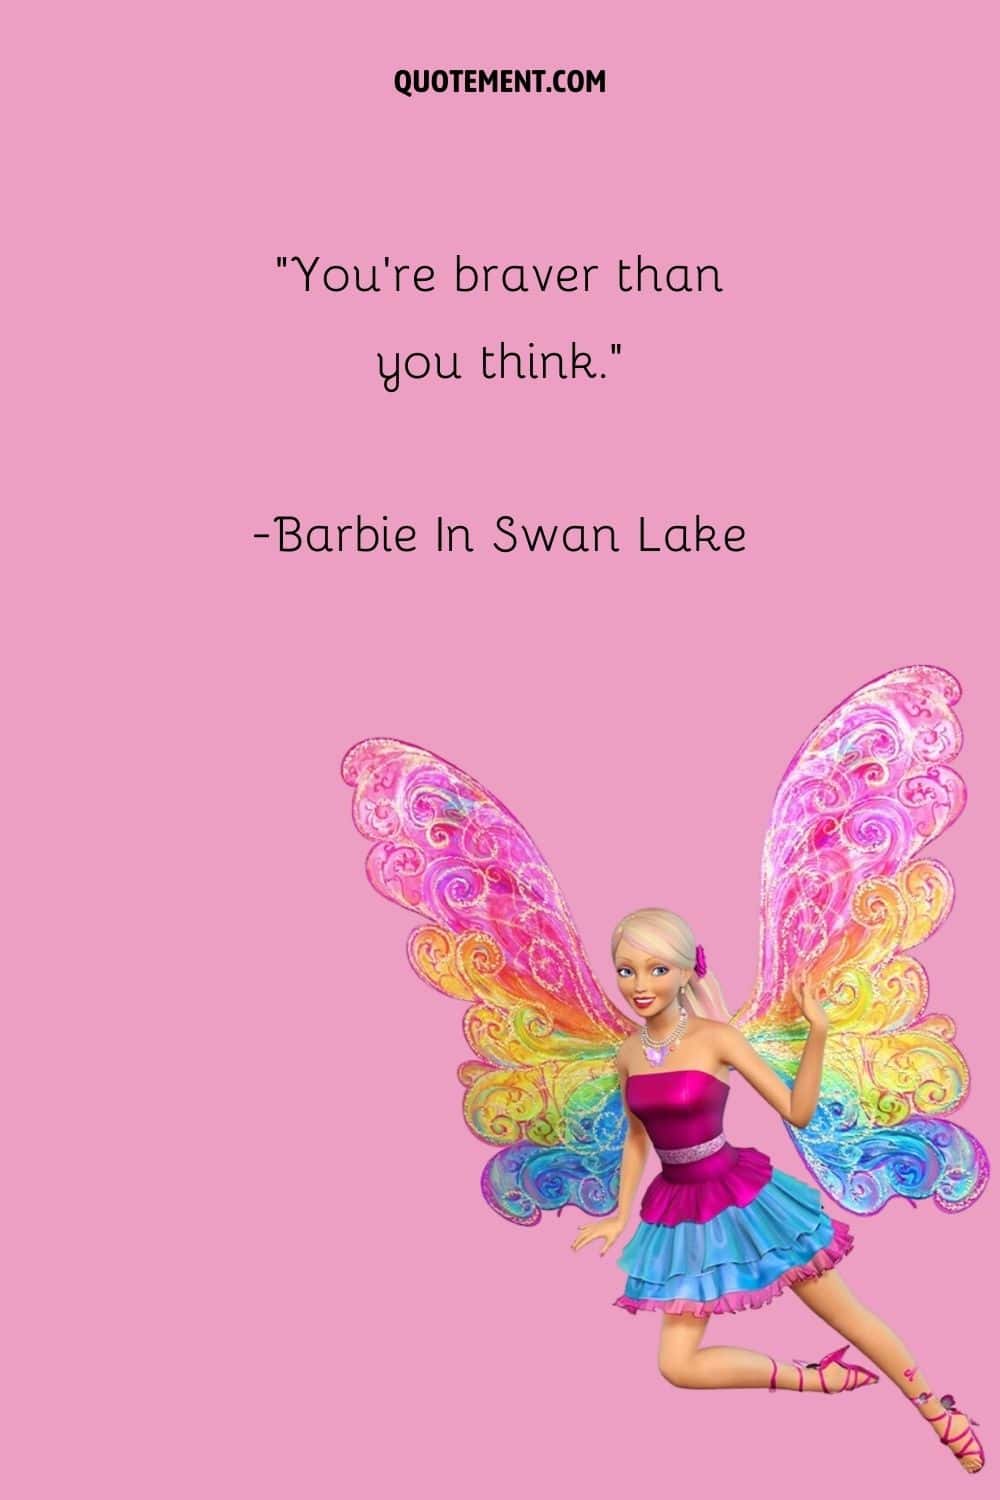 You’re braver than you think